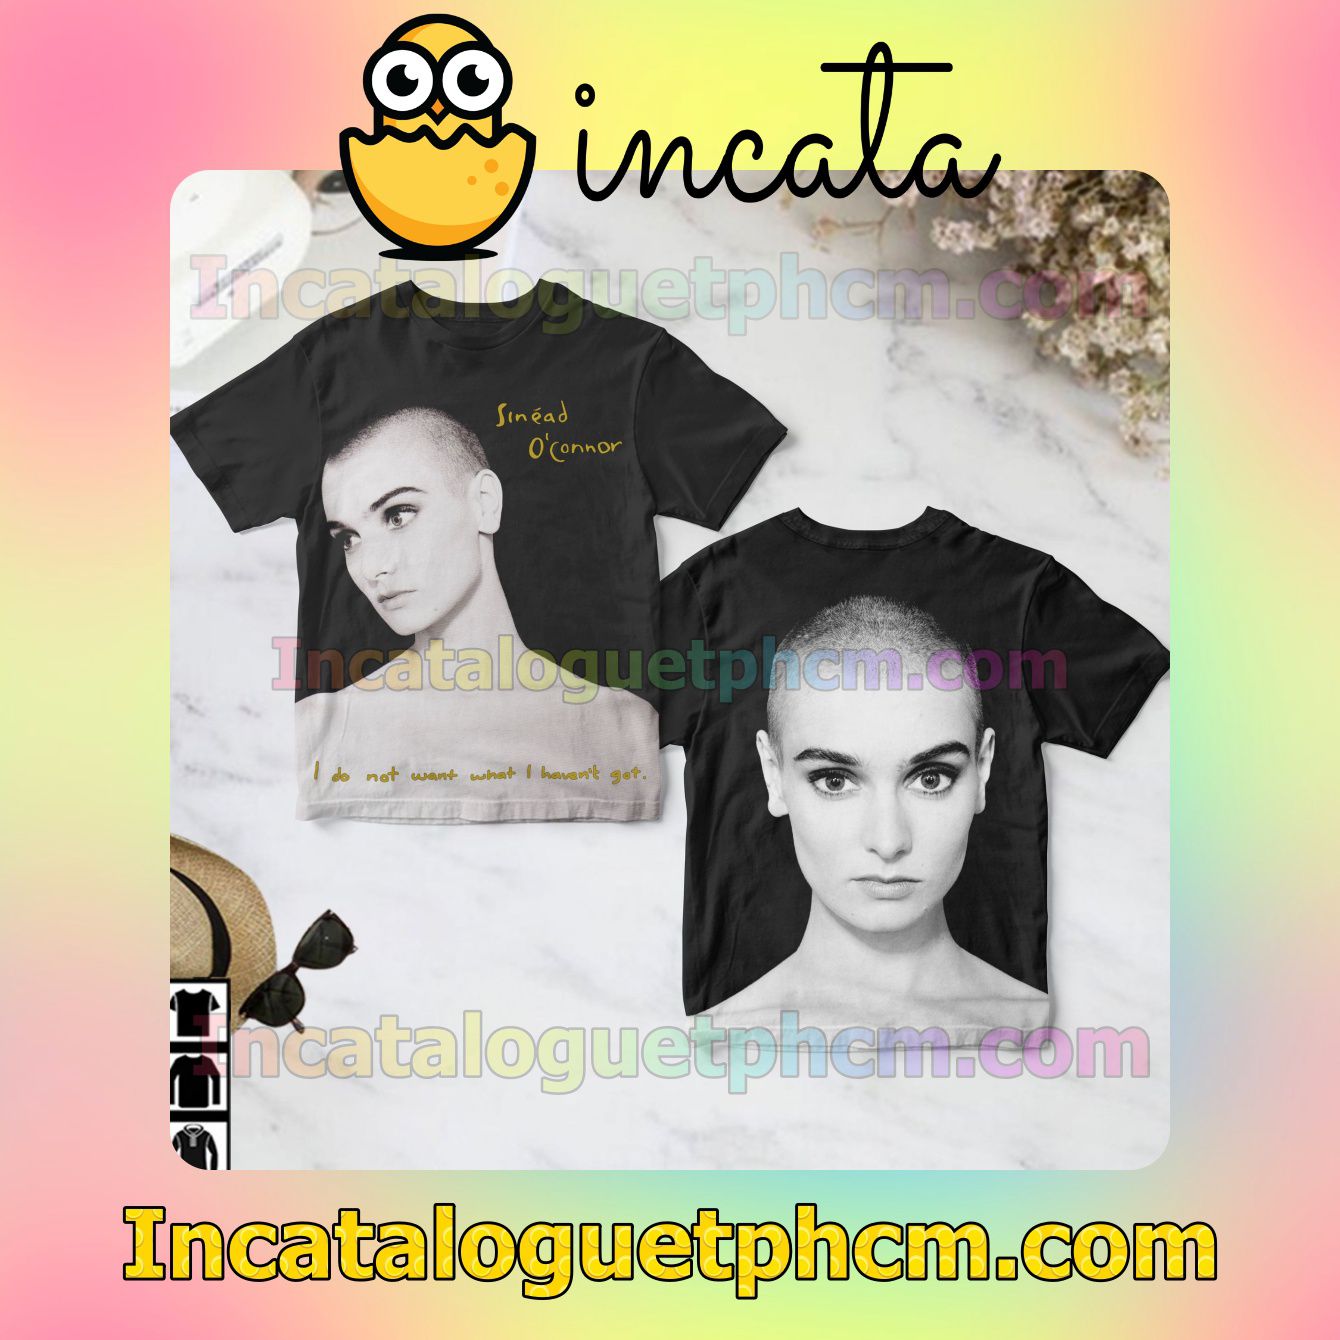 Sinéad O'connor I Do Not Want What I Haven't Got Album Cover Gift Shirt